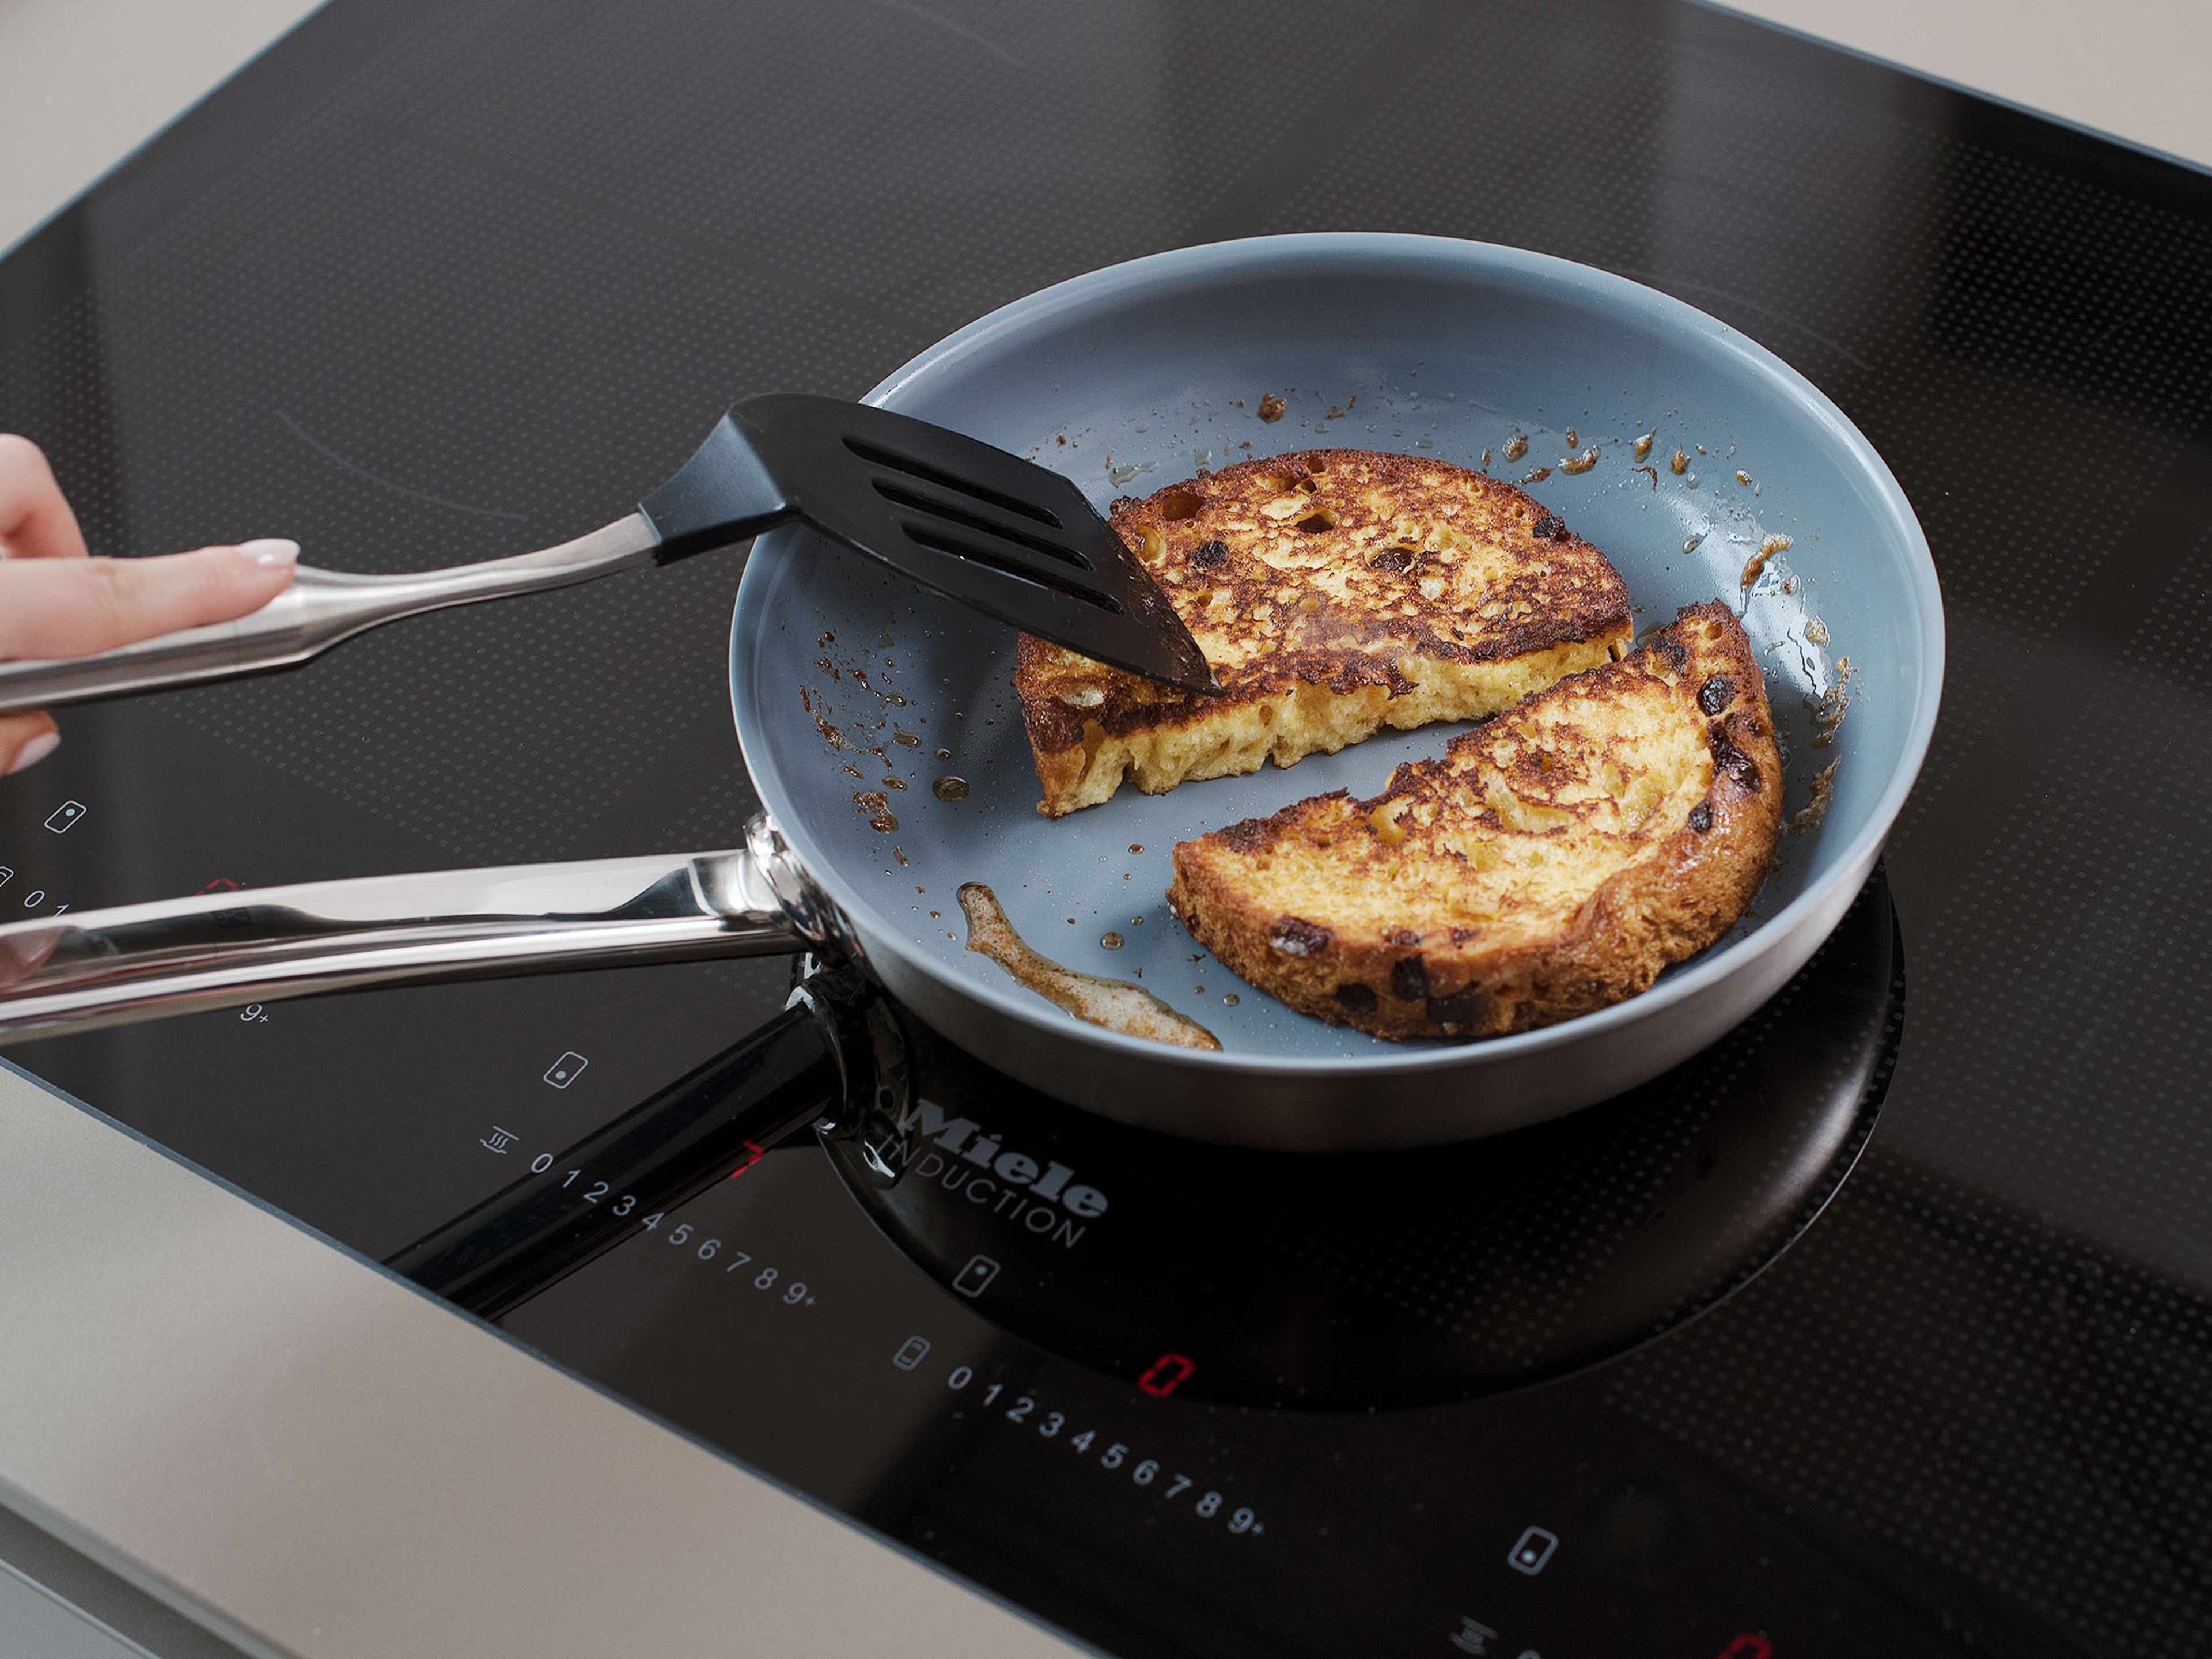 In a frying pan, melt butter over medium heat, and fry panettone for approx. 3 min. on each side, or until golden brown.